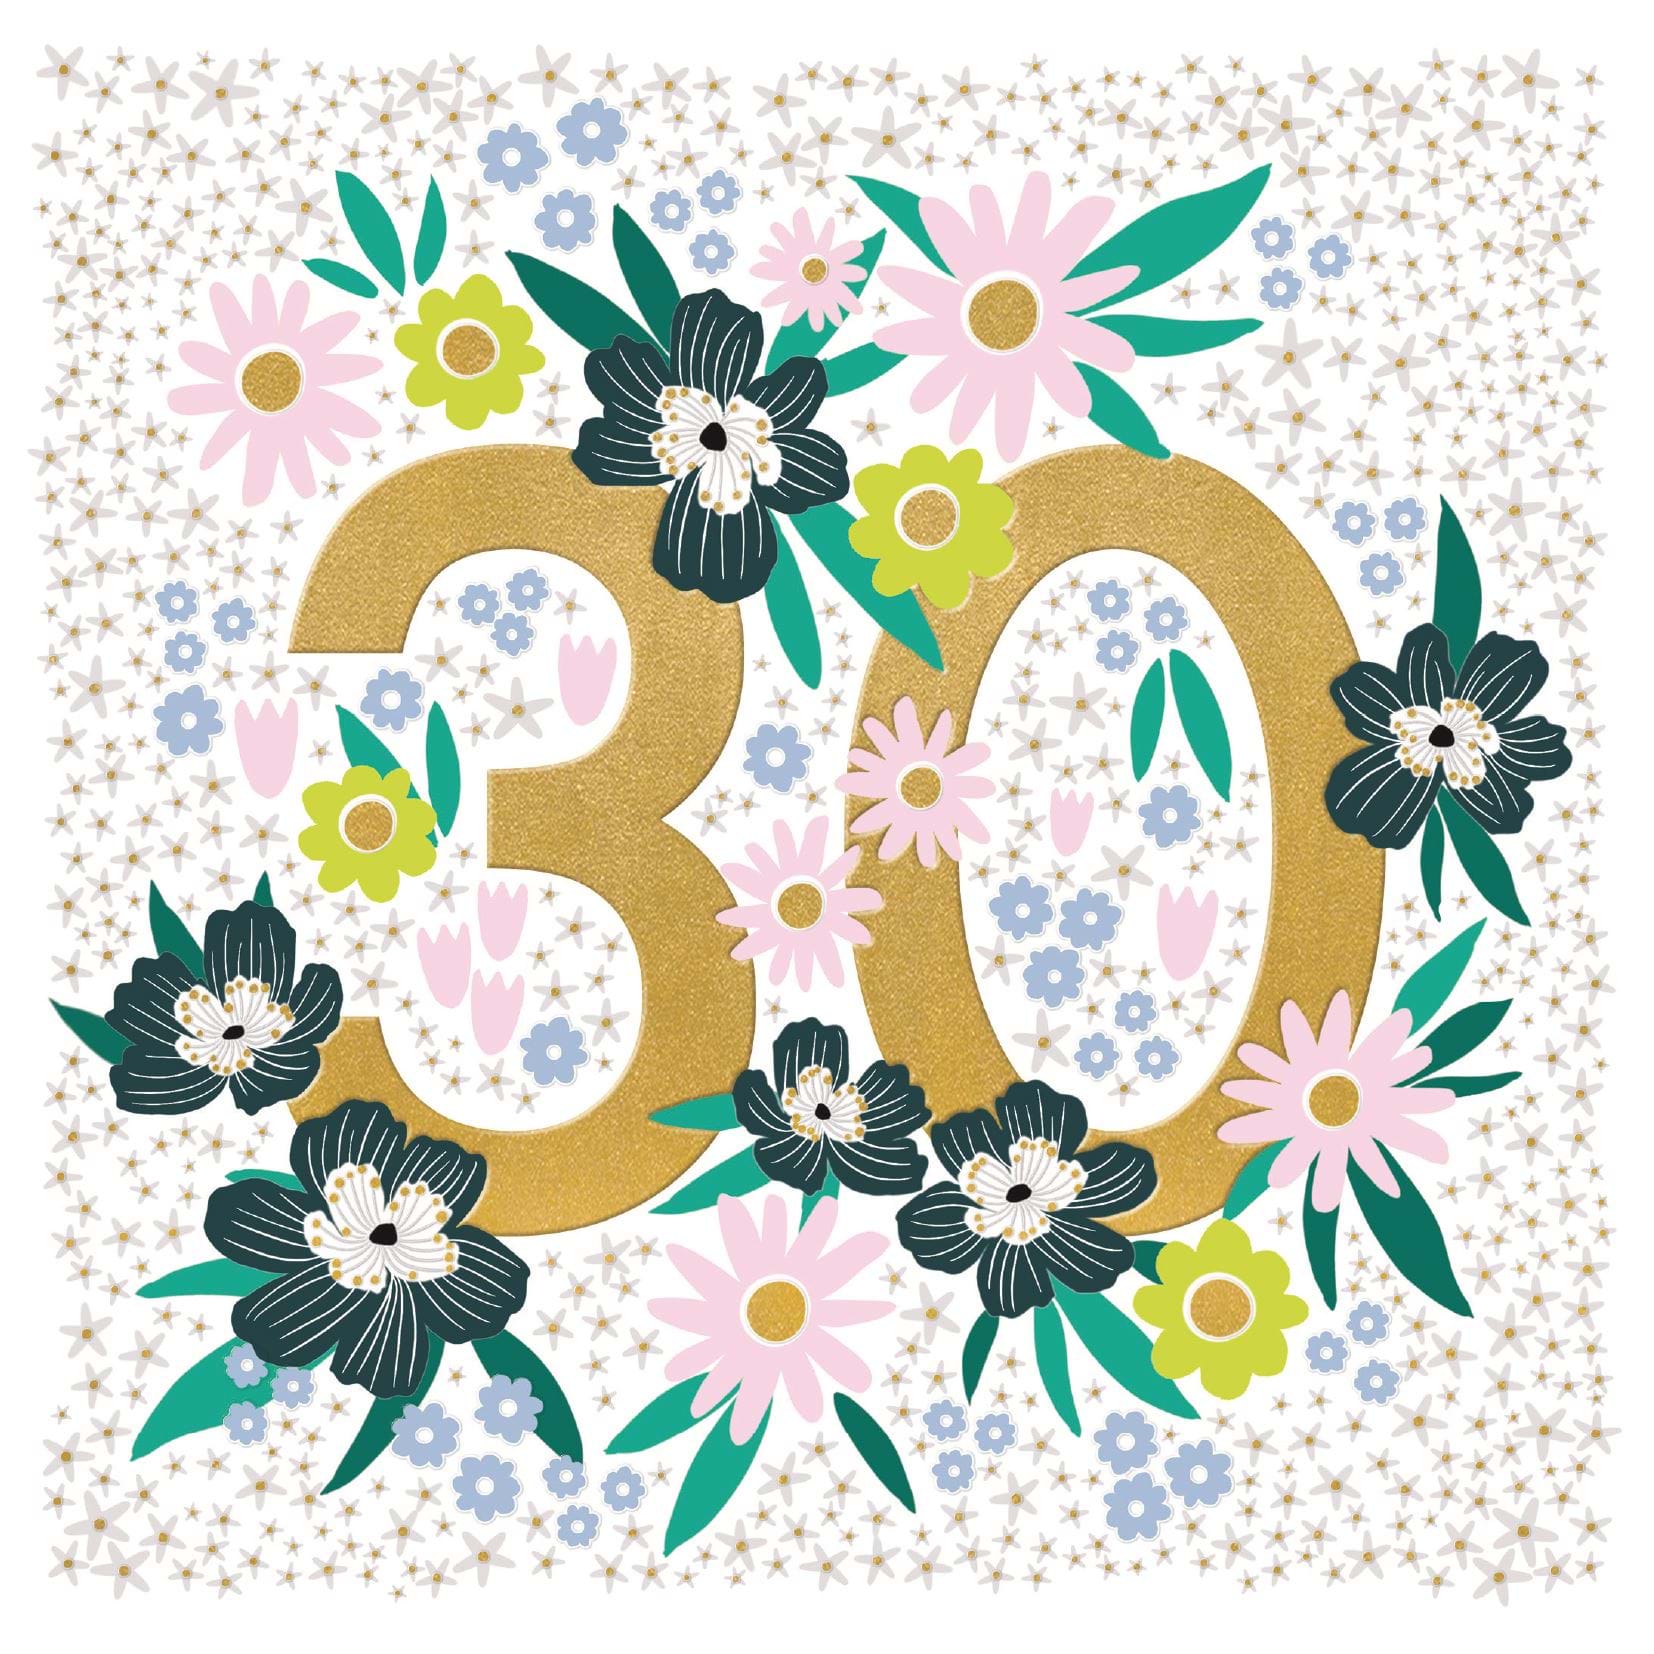 Fabulous Floral 30th Birthday Card